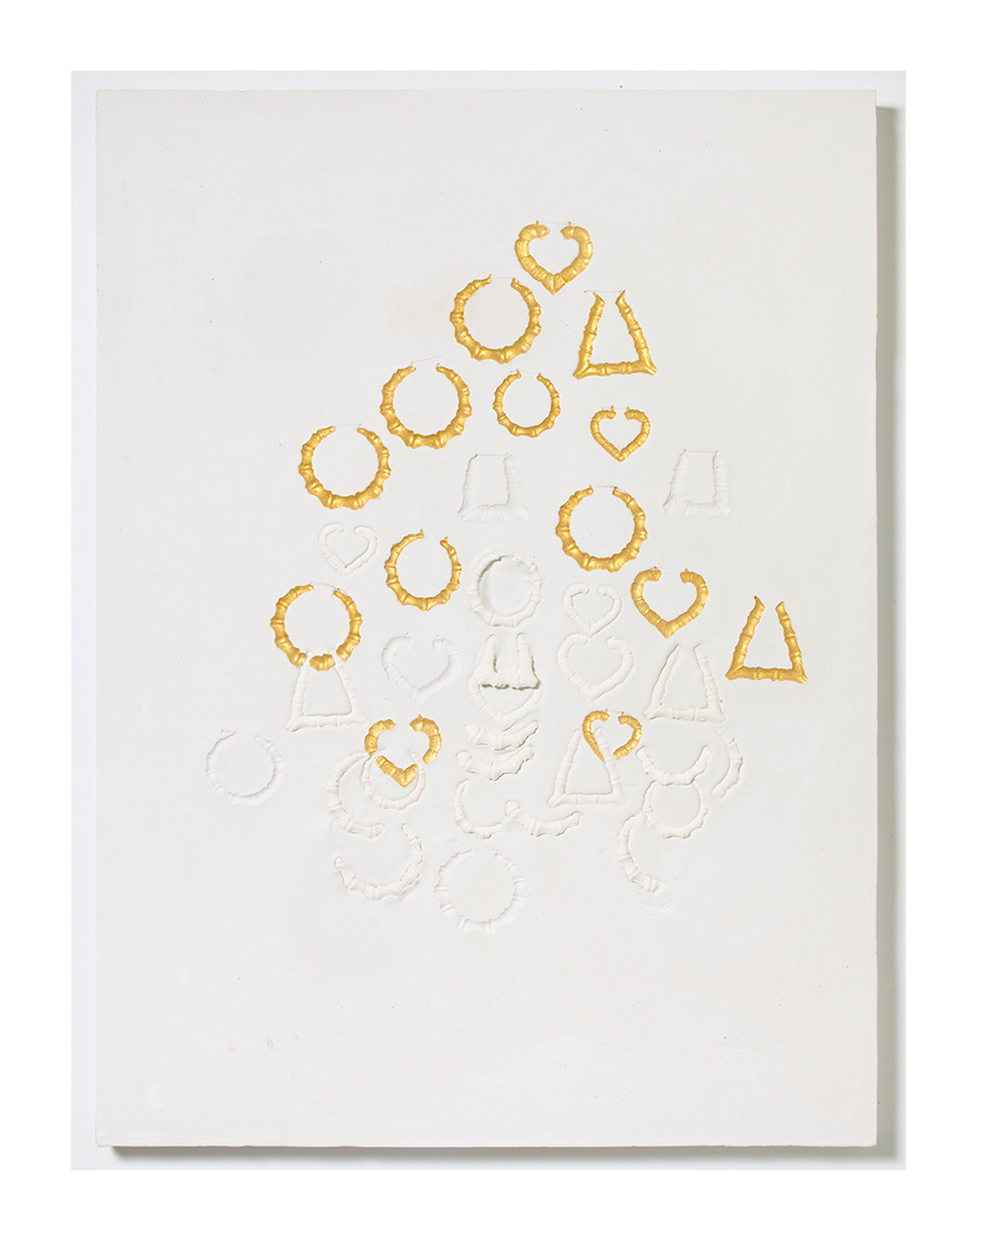 A plaster and acrylic painting of fourteen gold earrings interspersed among the imprints of 23 white earrings, the latter of which appear to blend in with the white background. About half of the earrings are circular hoops, and the other half are triangular hoops. 